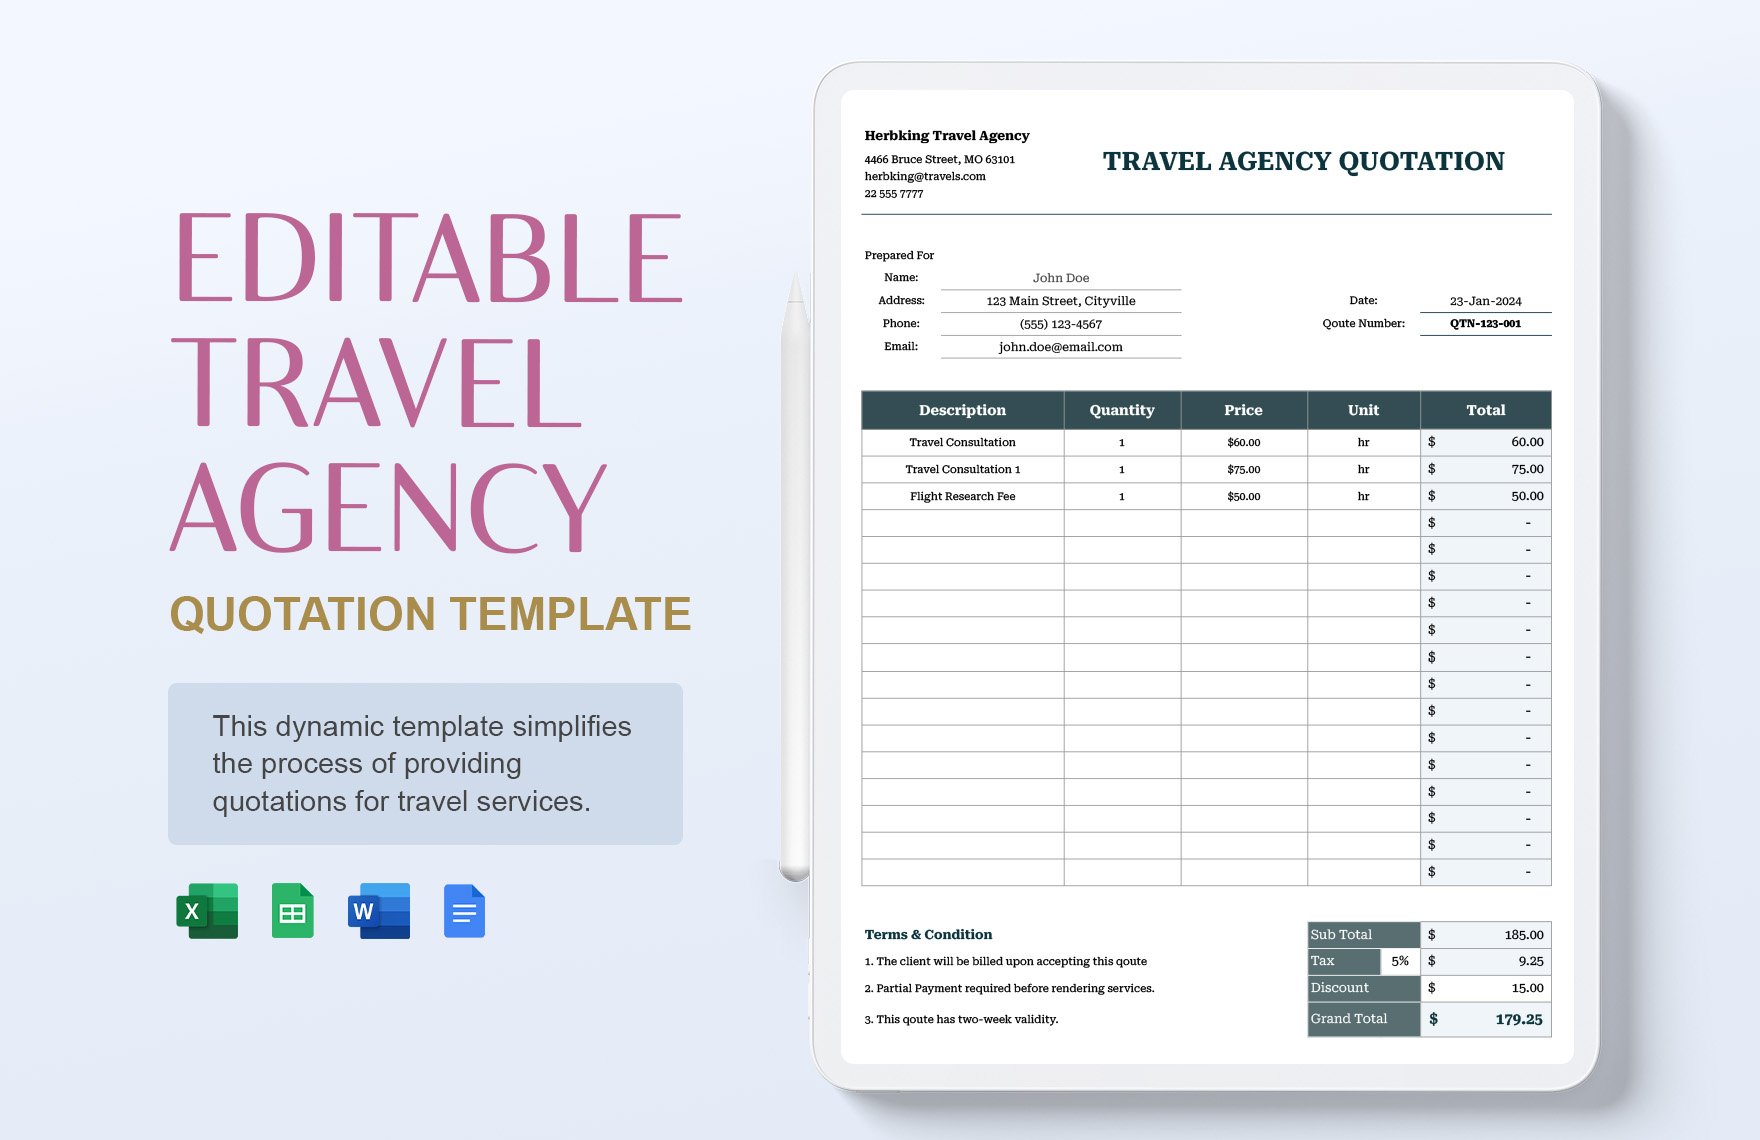 Editable Travel Agency Quotation Template in Word, Google Docs, Excel, Google Sheets